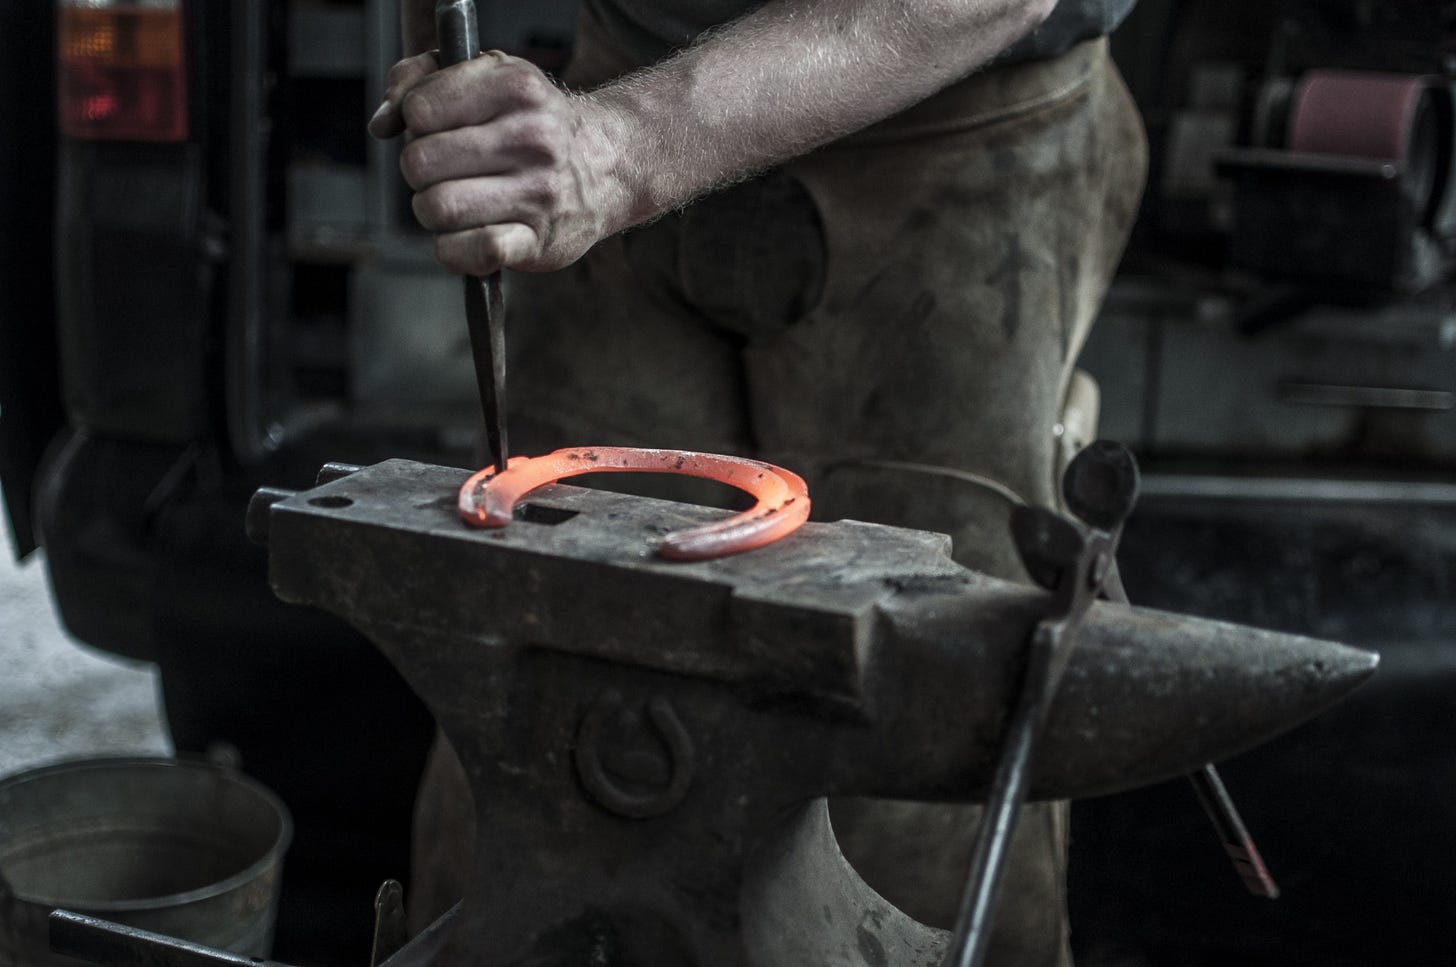 image of a blacksmith working for article titled “go where work is hard”